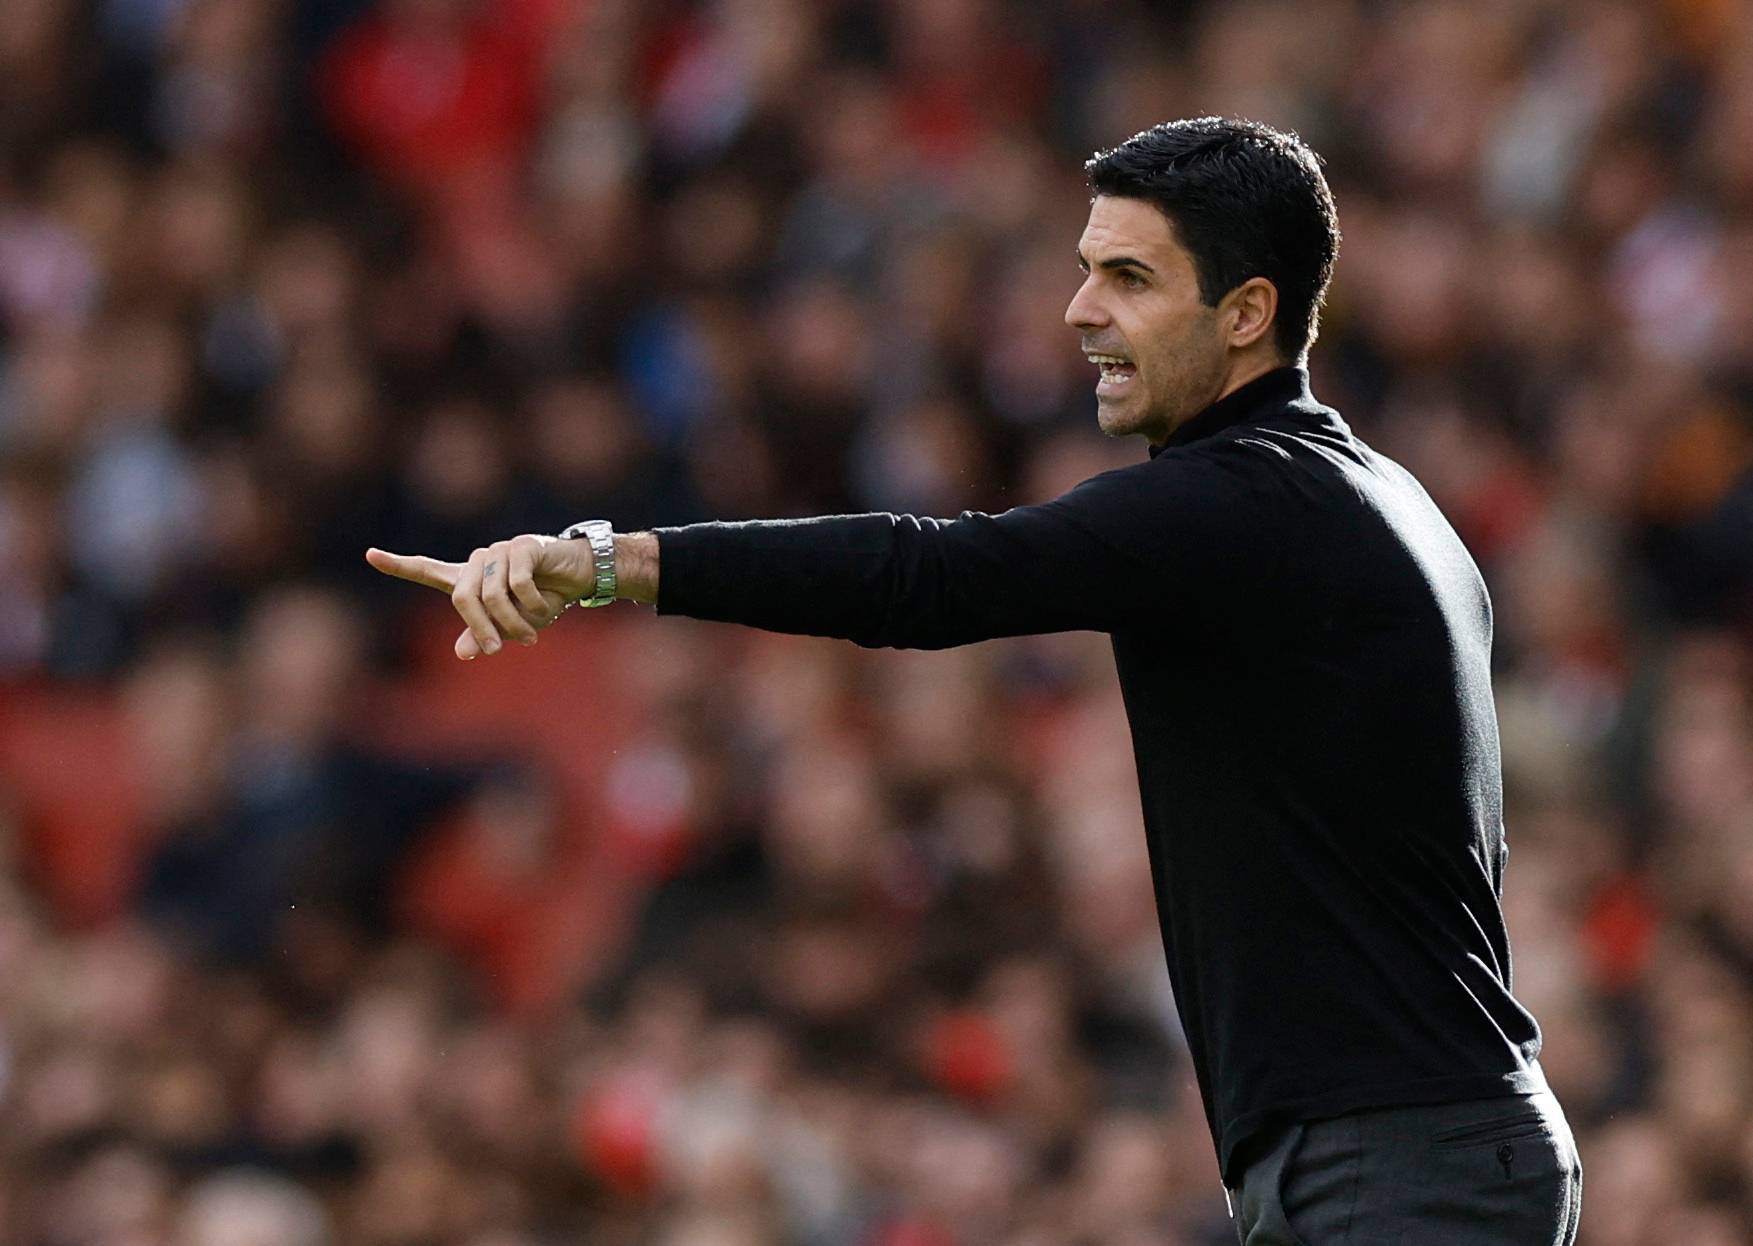 Arsenal manager Mikel Arteta instructing his team against Nottingham Forest